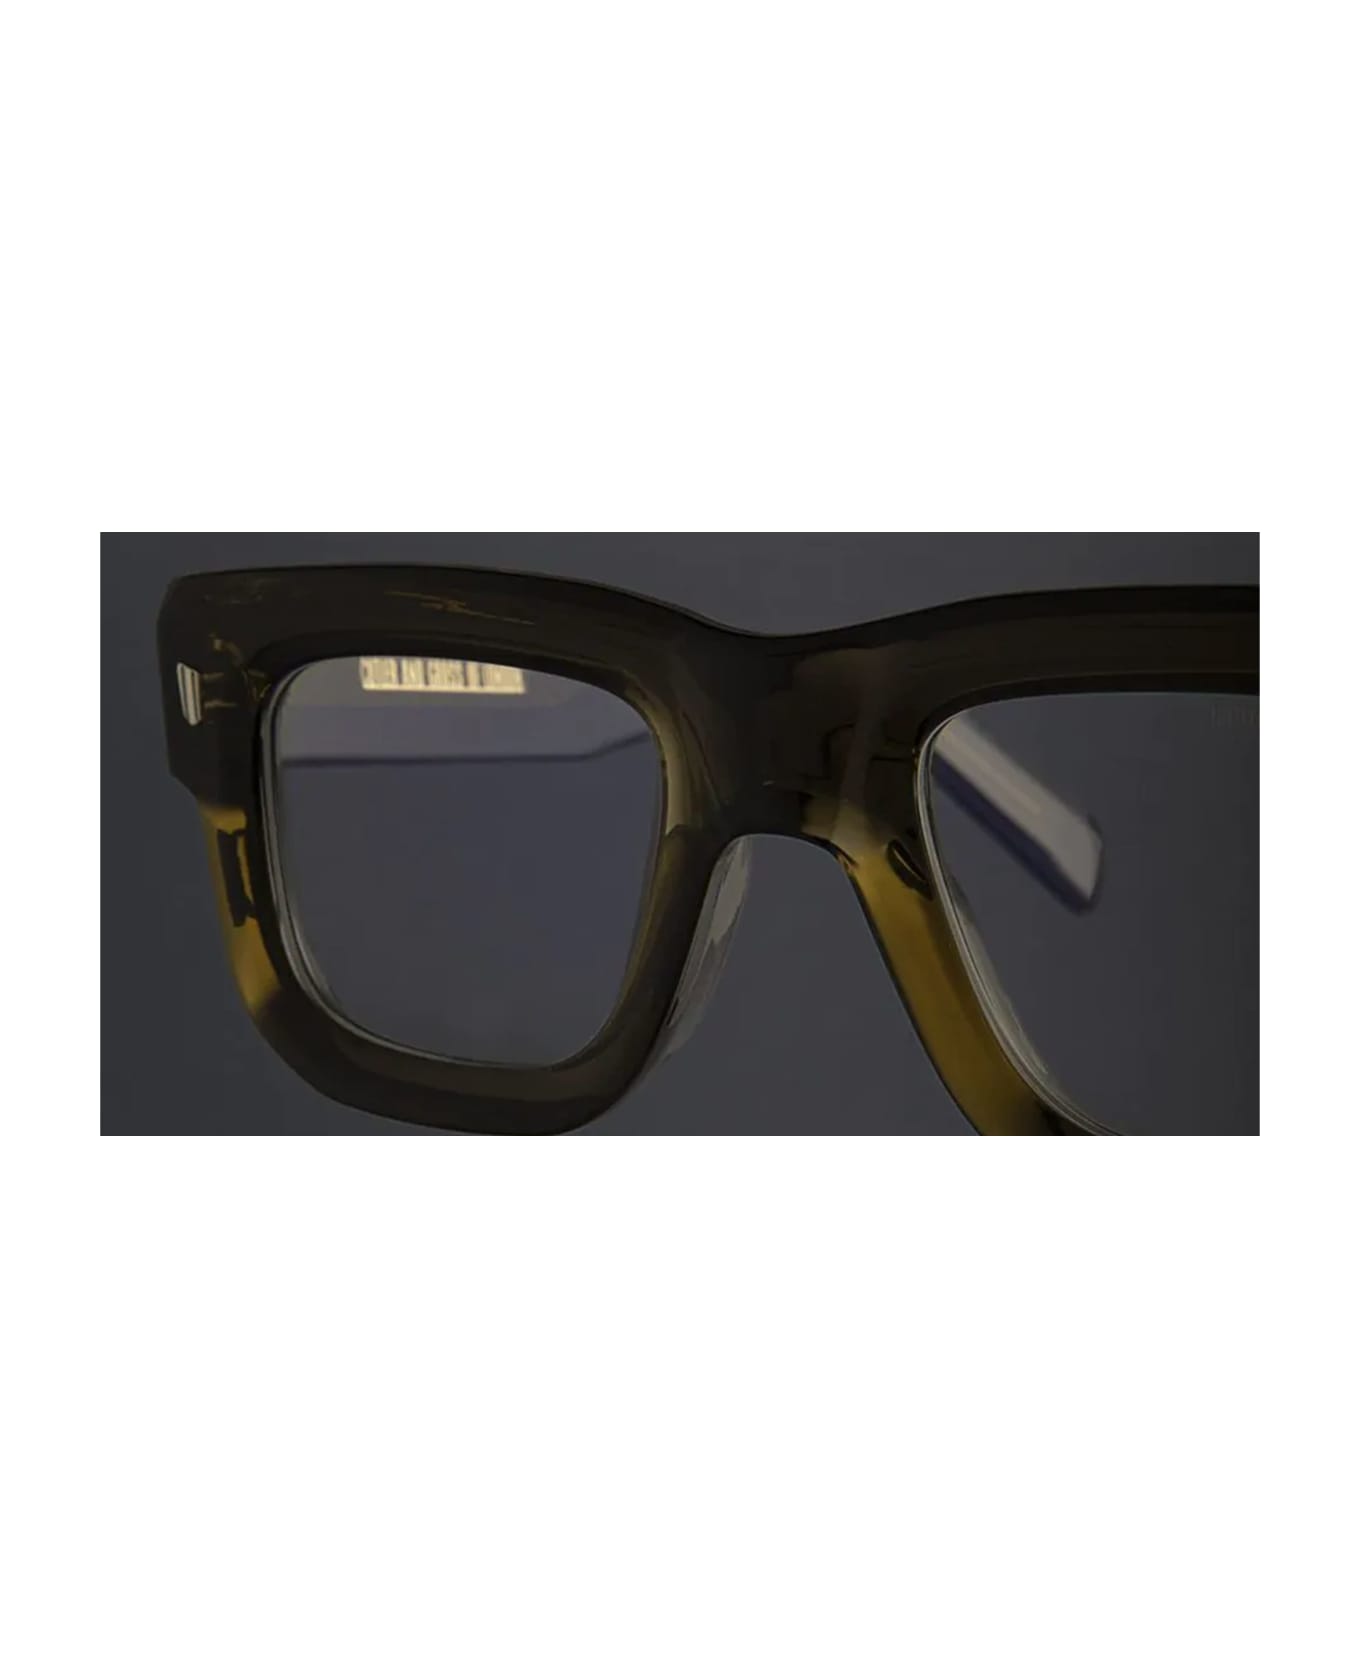 Cutler and Gross 1402 / Olive Rx Glasses - Olive アイウェア